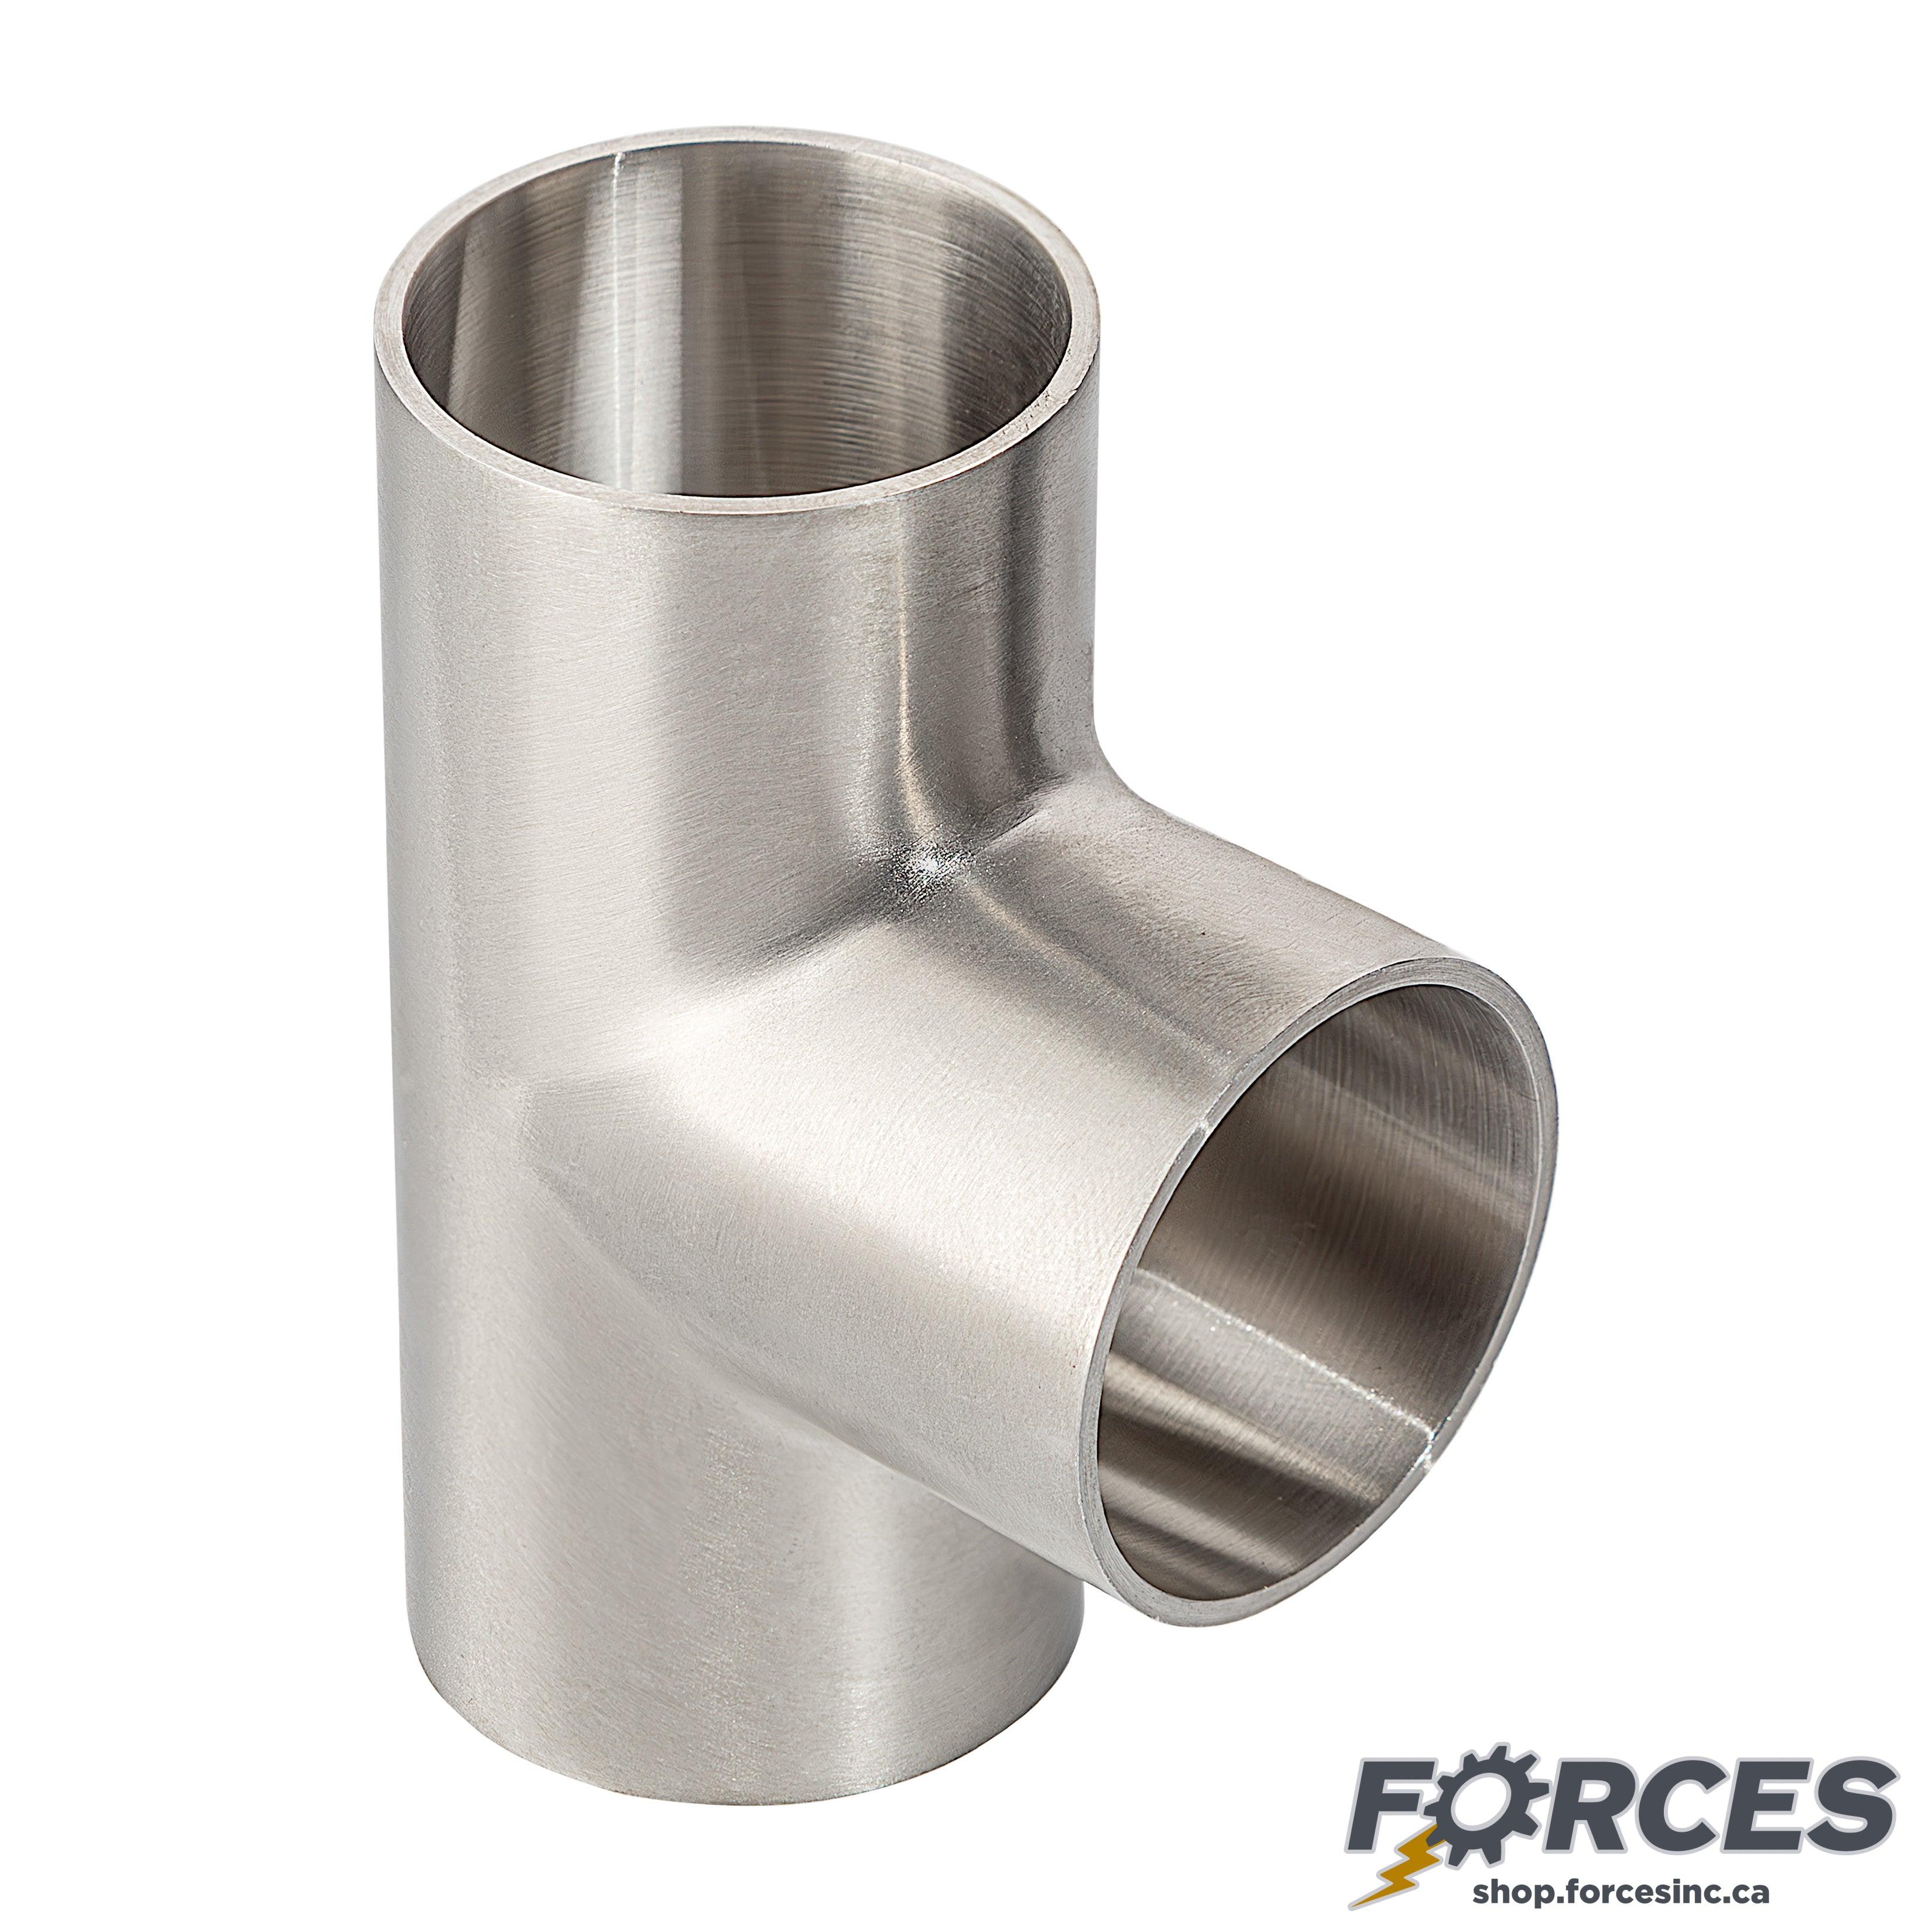 3" Butt Weld Short Tee - Stainless Steel 304 - Forces Inc